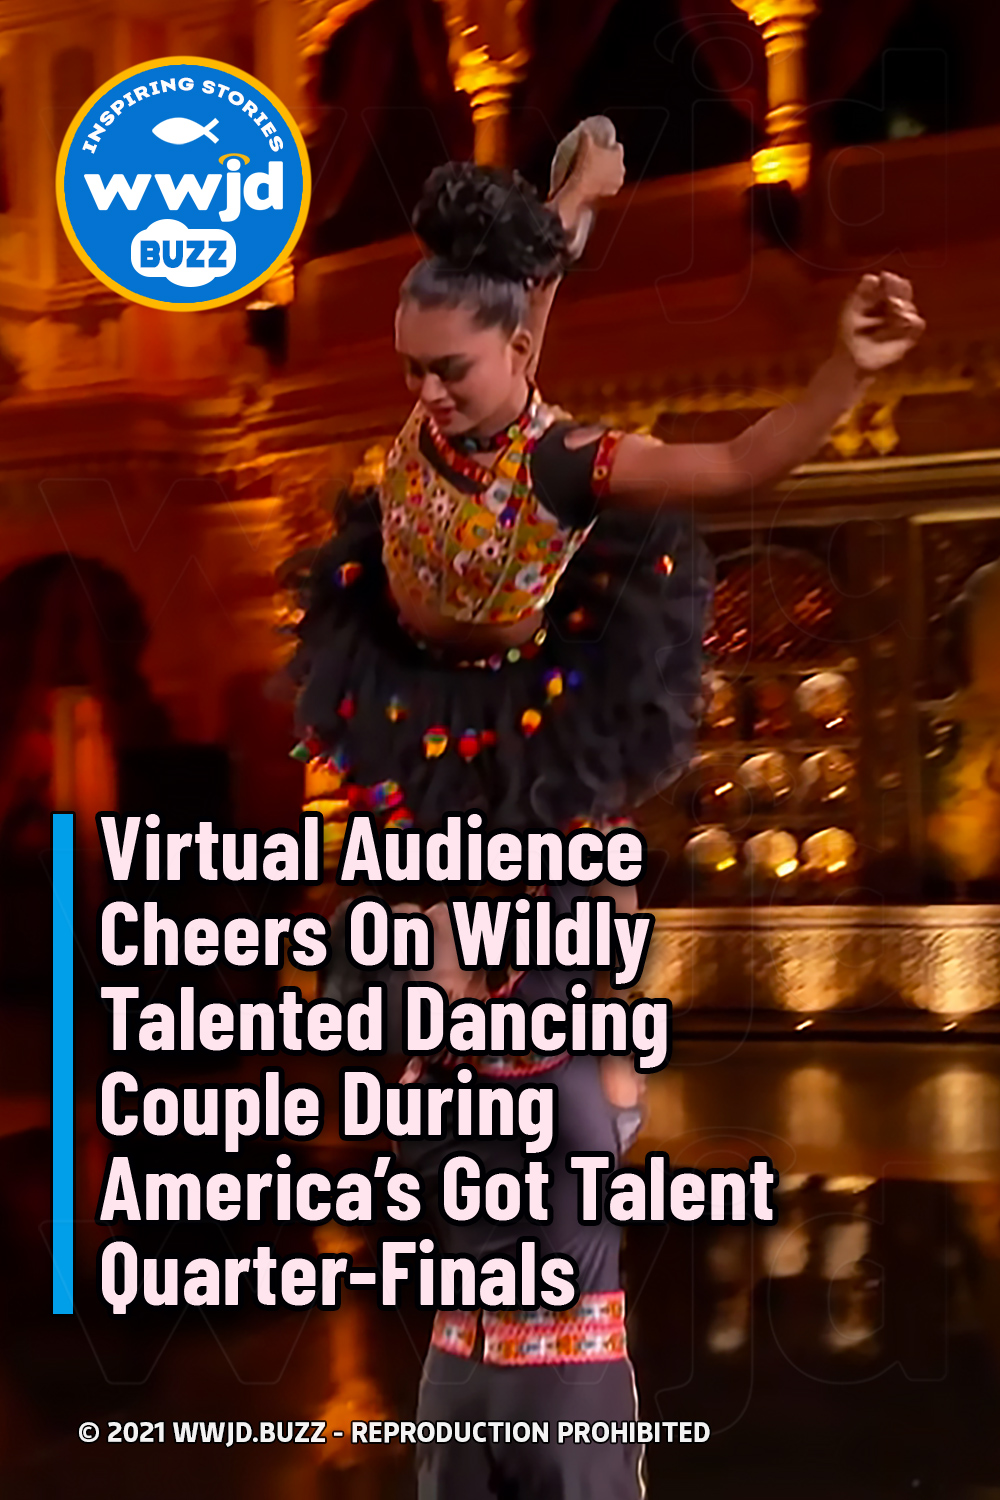 Virtual Audience Cheers On Wildly Talented Dancing Couple During America’s Got Talent Quarter-Finals